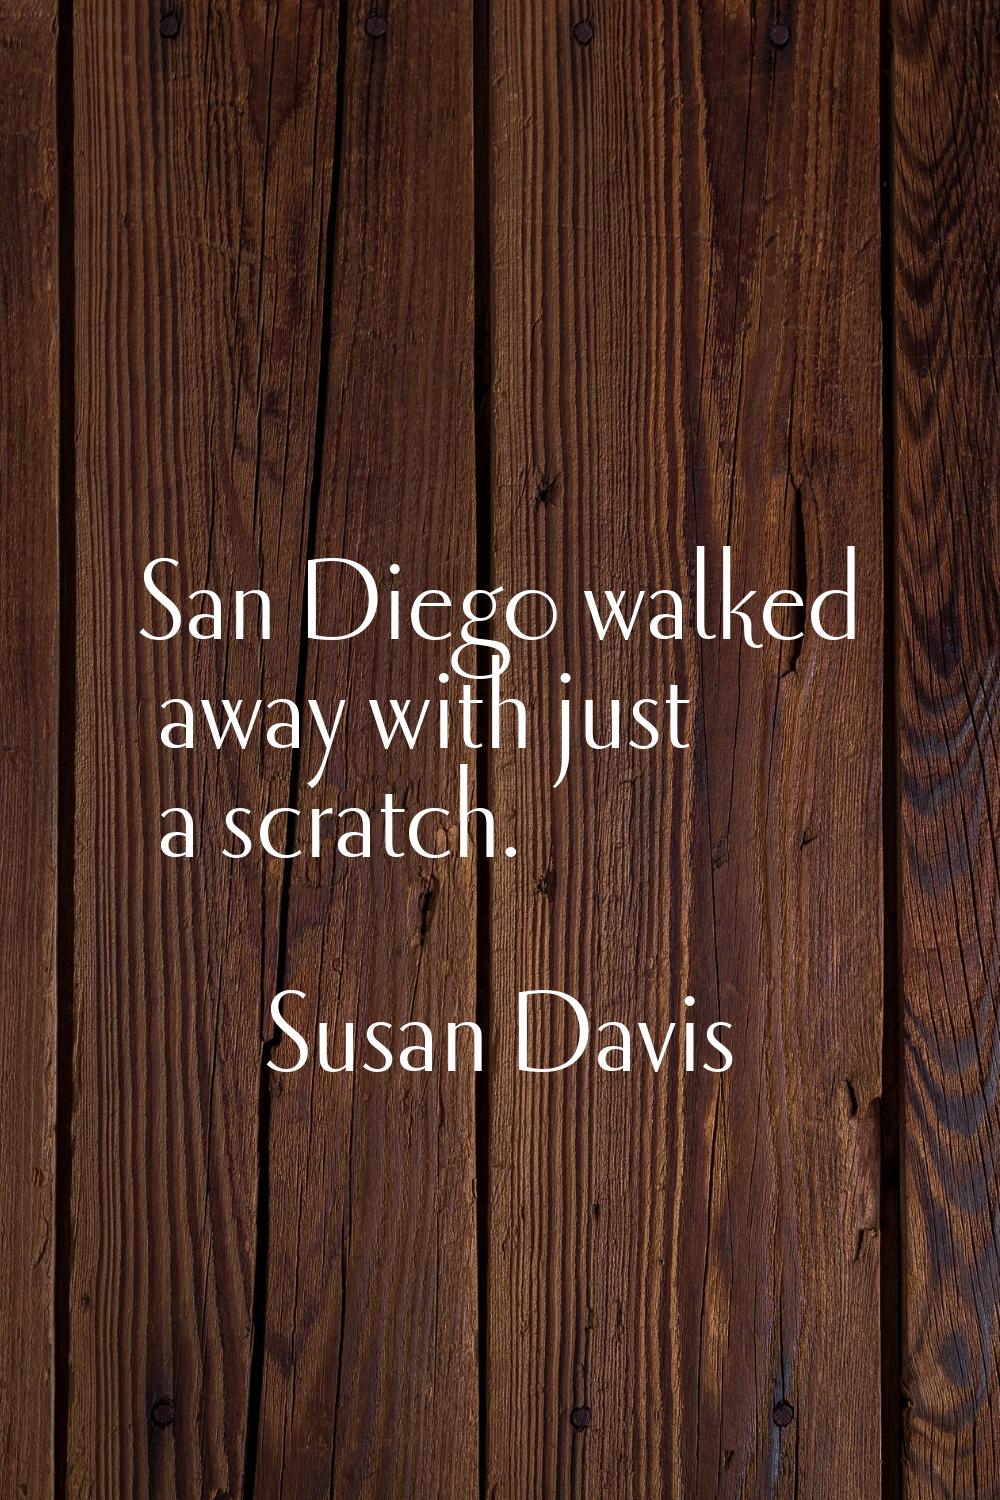 San Diego walked away with just a scratch.